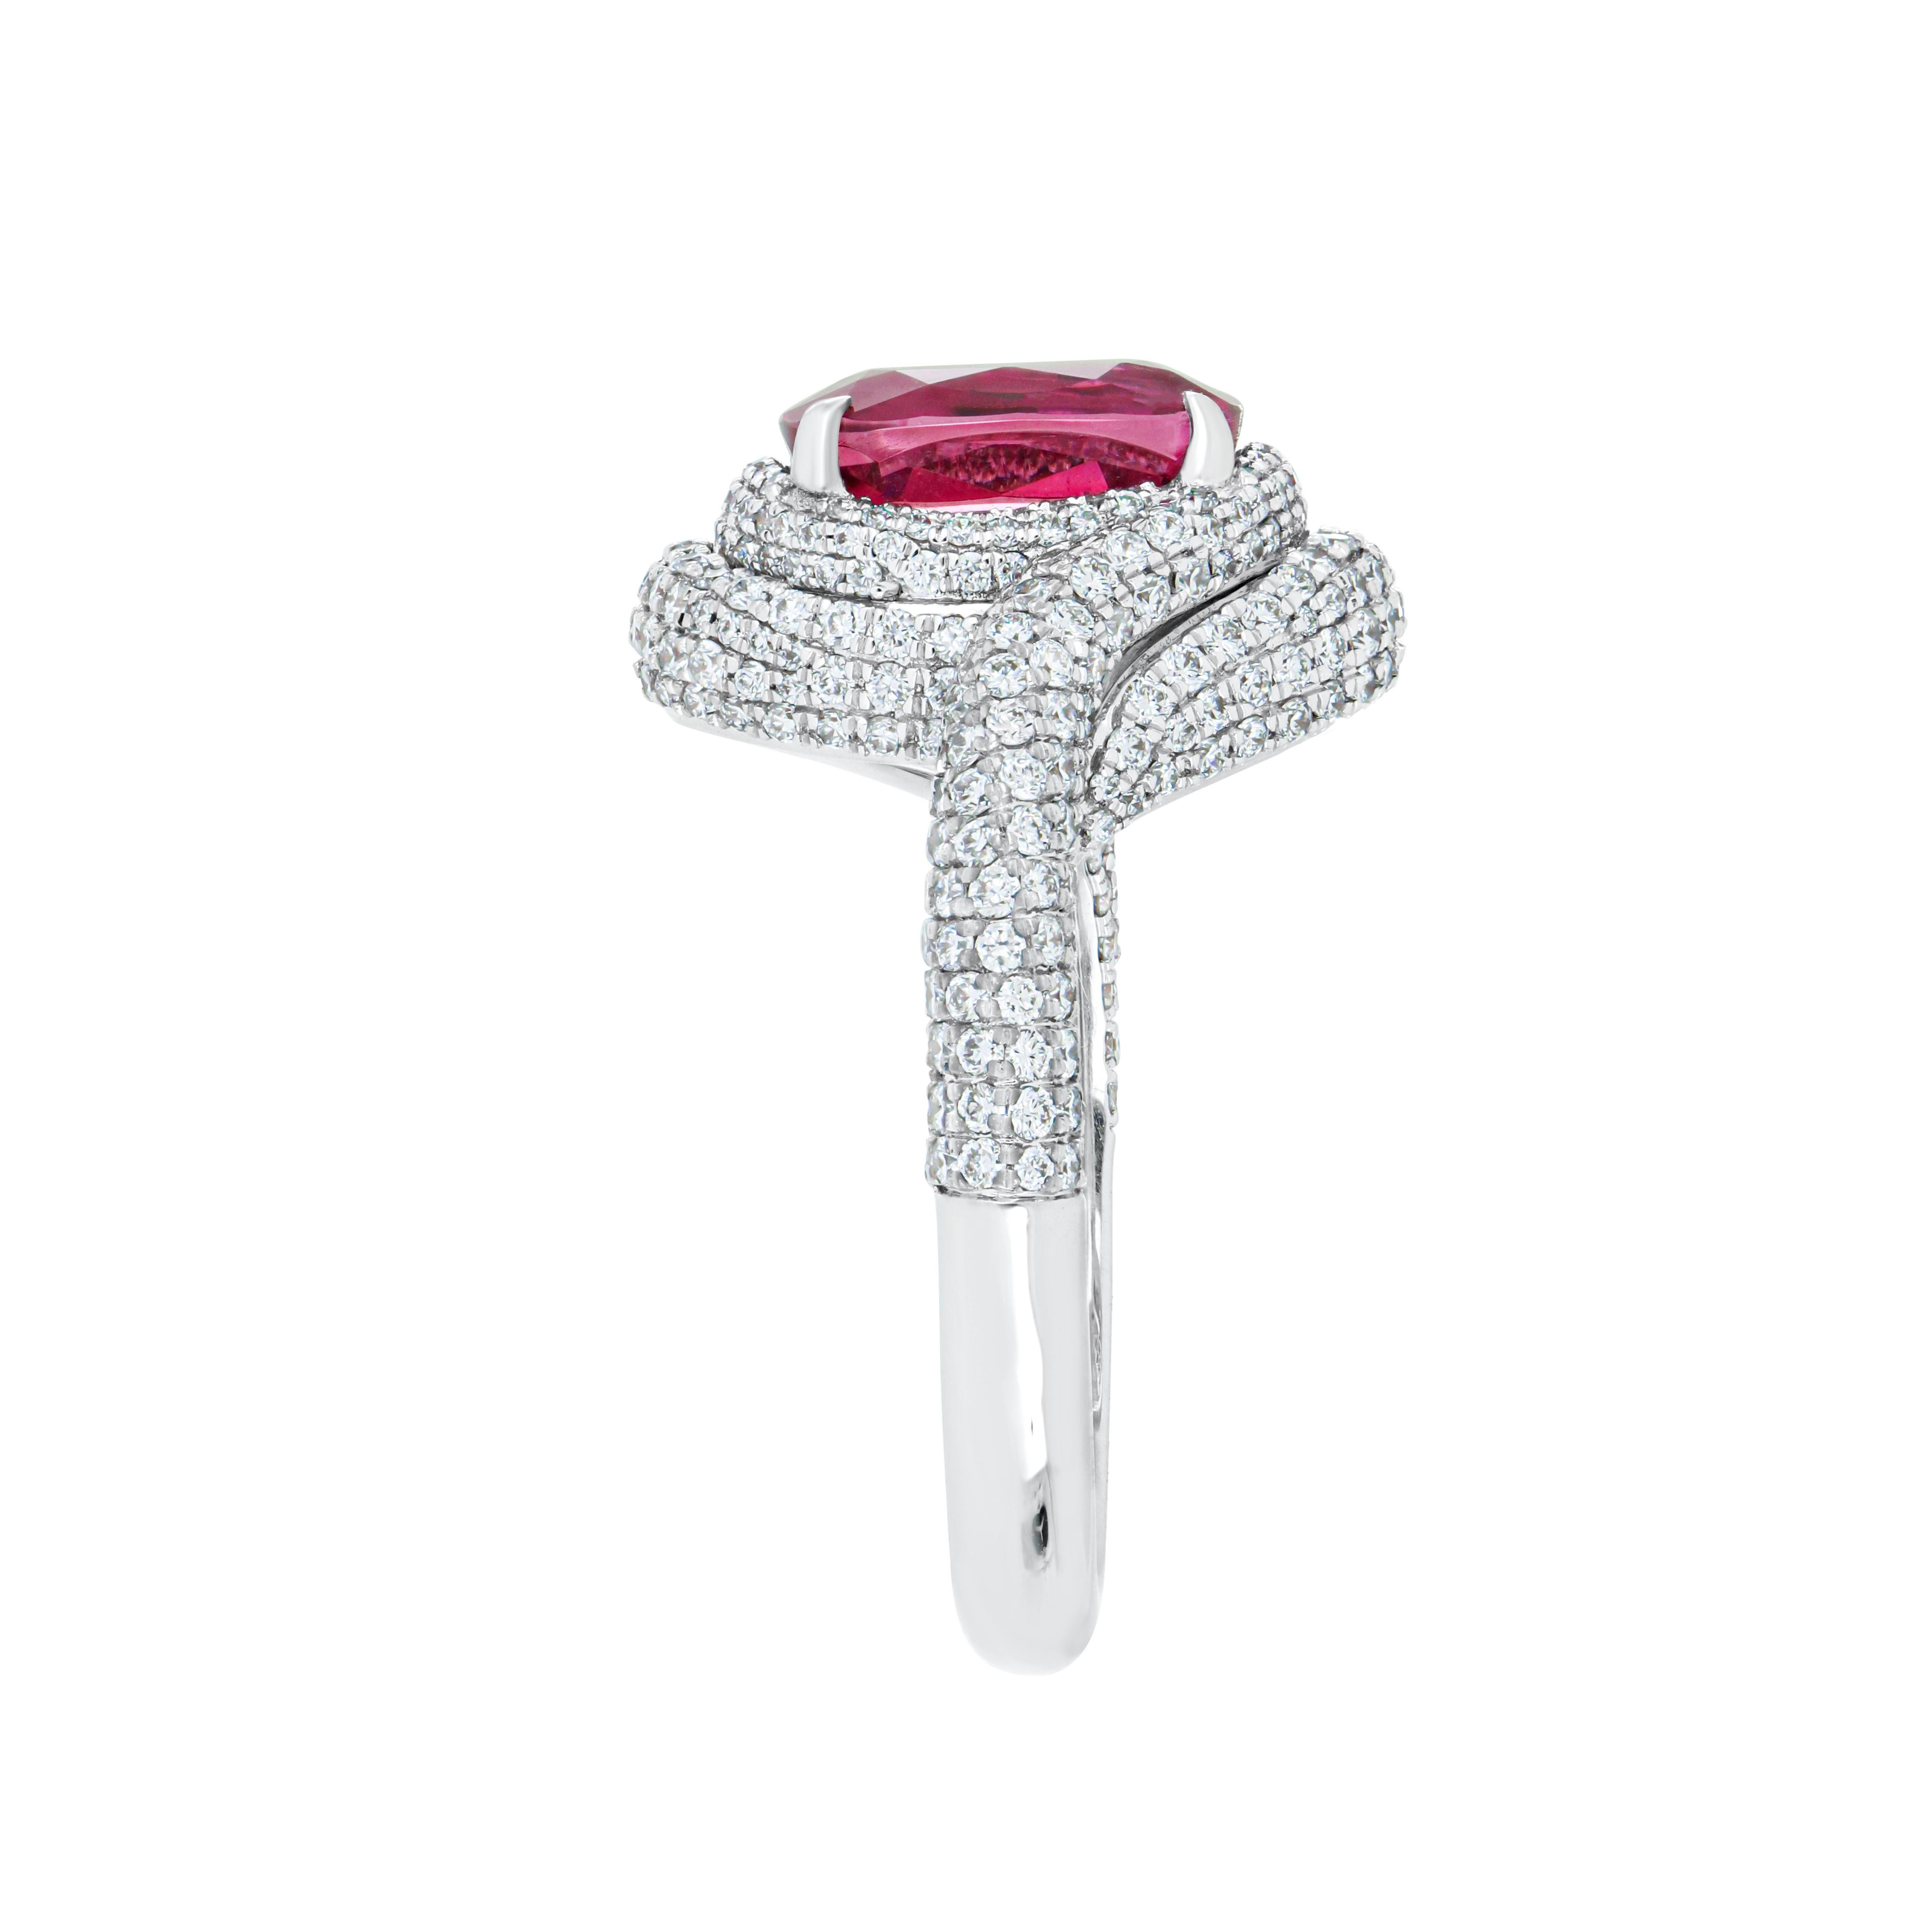 4.05 Carats Rubellite and Diamond Studded Ring in 18K White Gold Ring For Sale 2